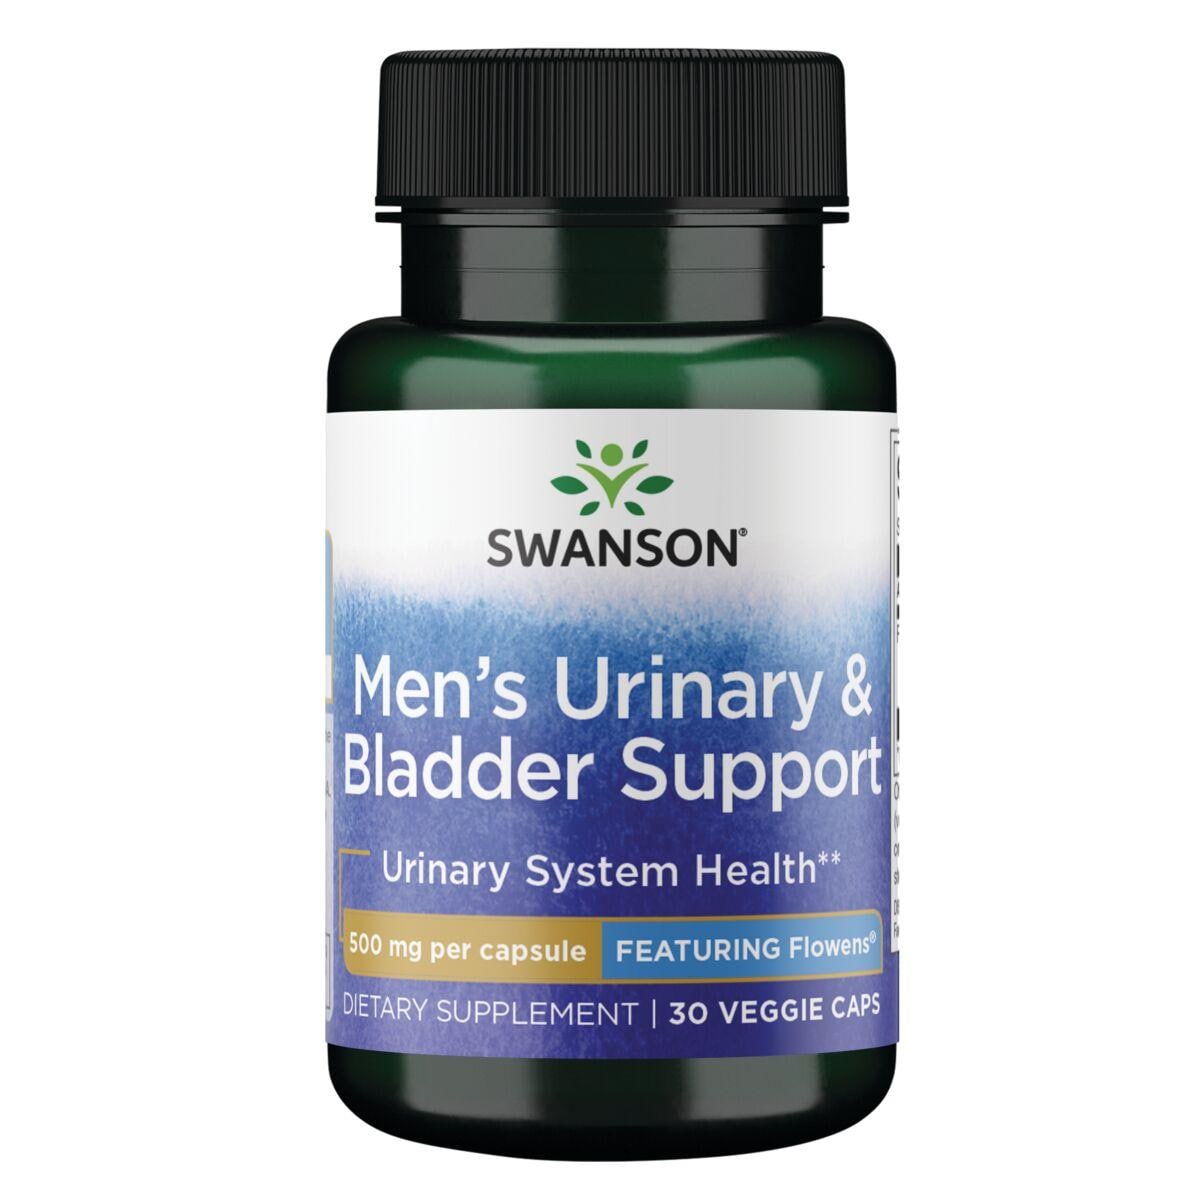 Swanson Premium Mens Urinary and Bladder Support - Featuring Flowens Vitamin 500 mg 30 Veg Caps Prostate Health